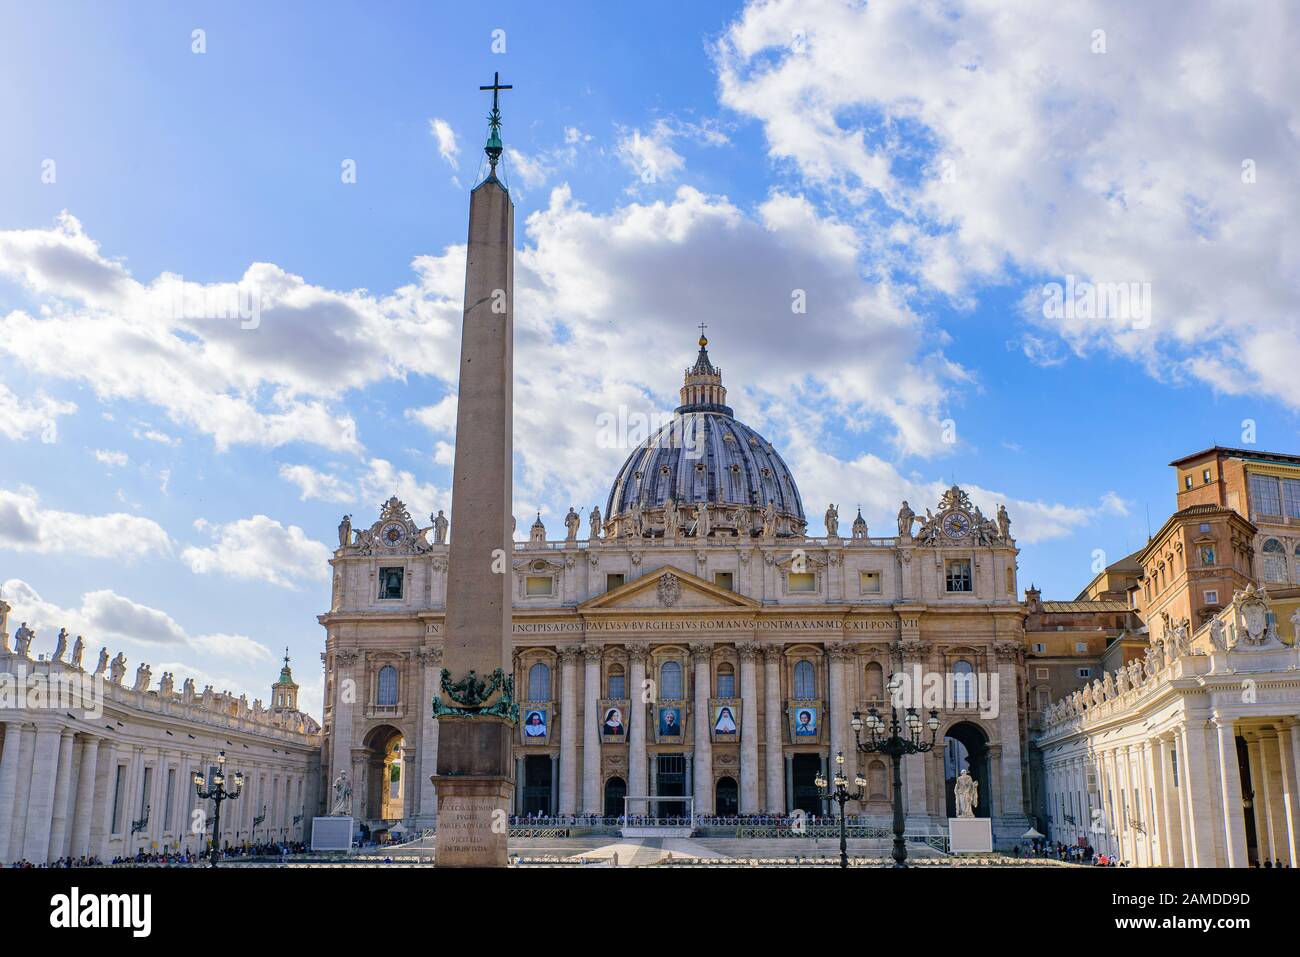 St. Peter's Basilica in Vatican City, the largest church in the world Stock Photo